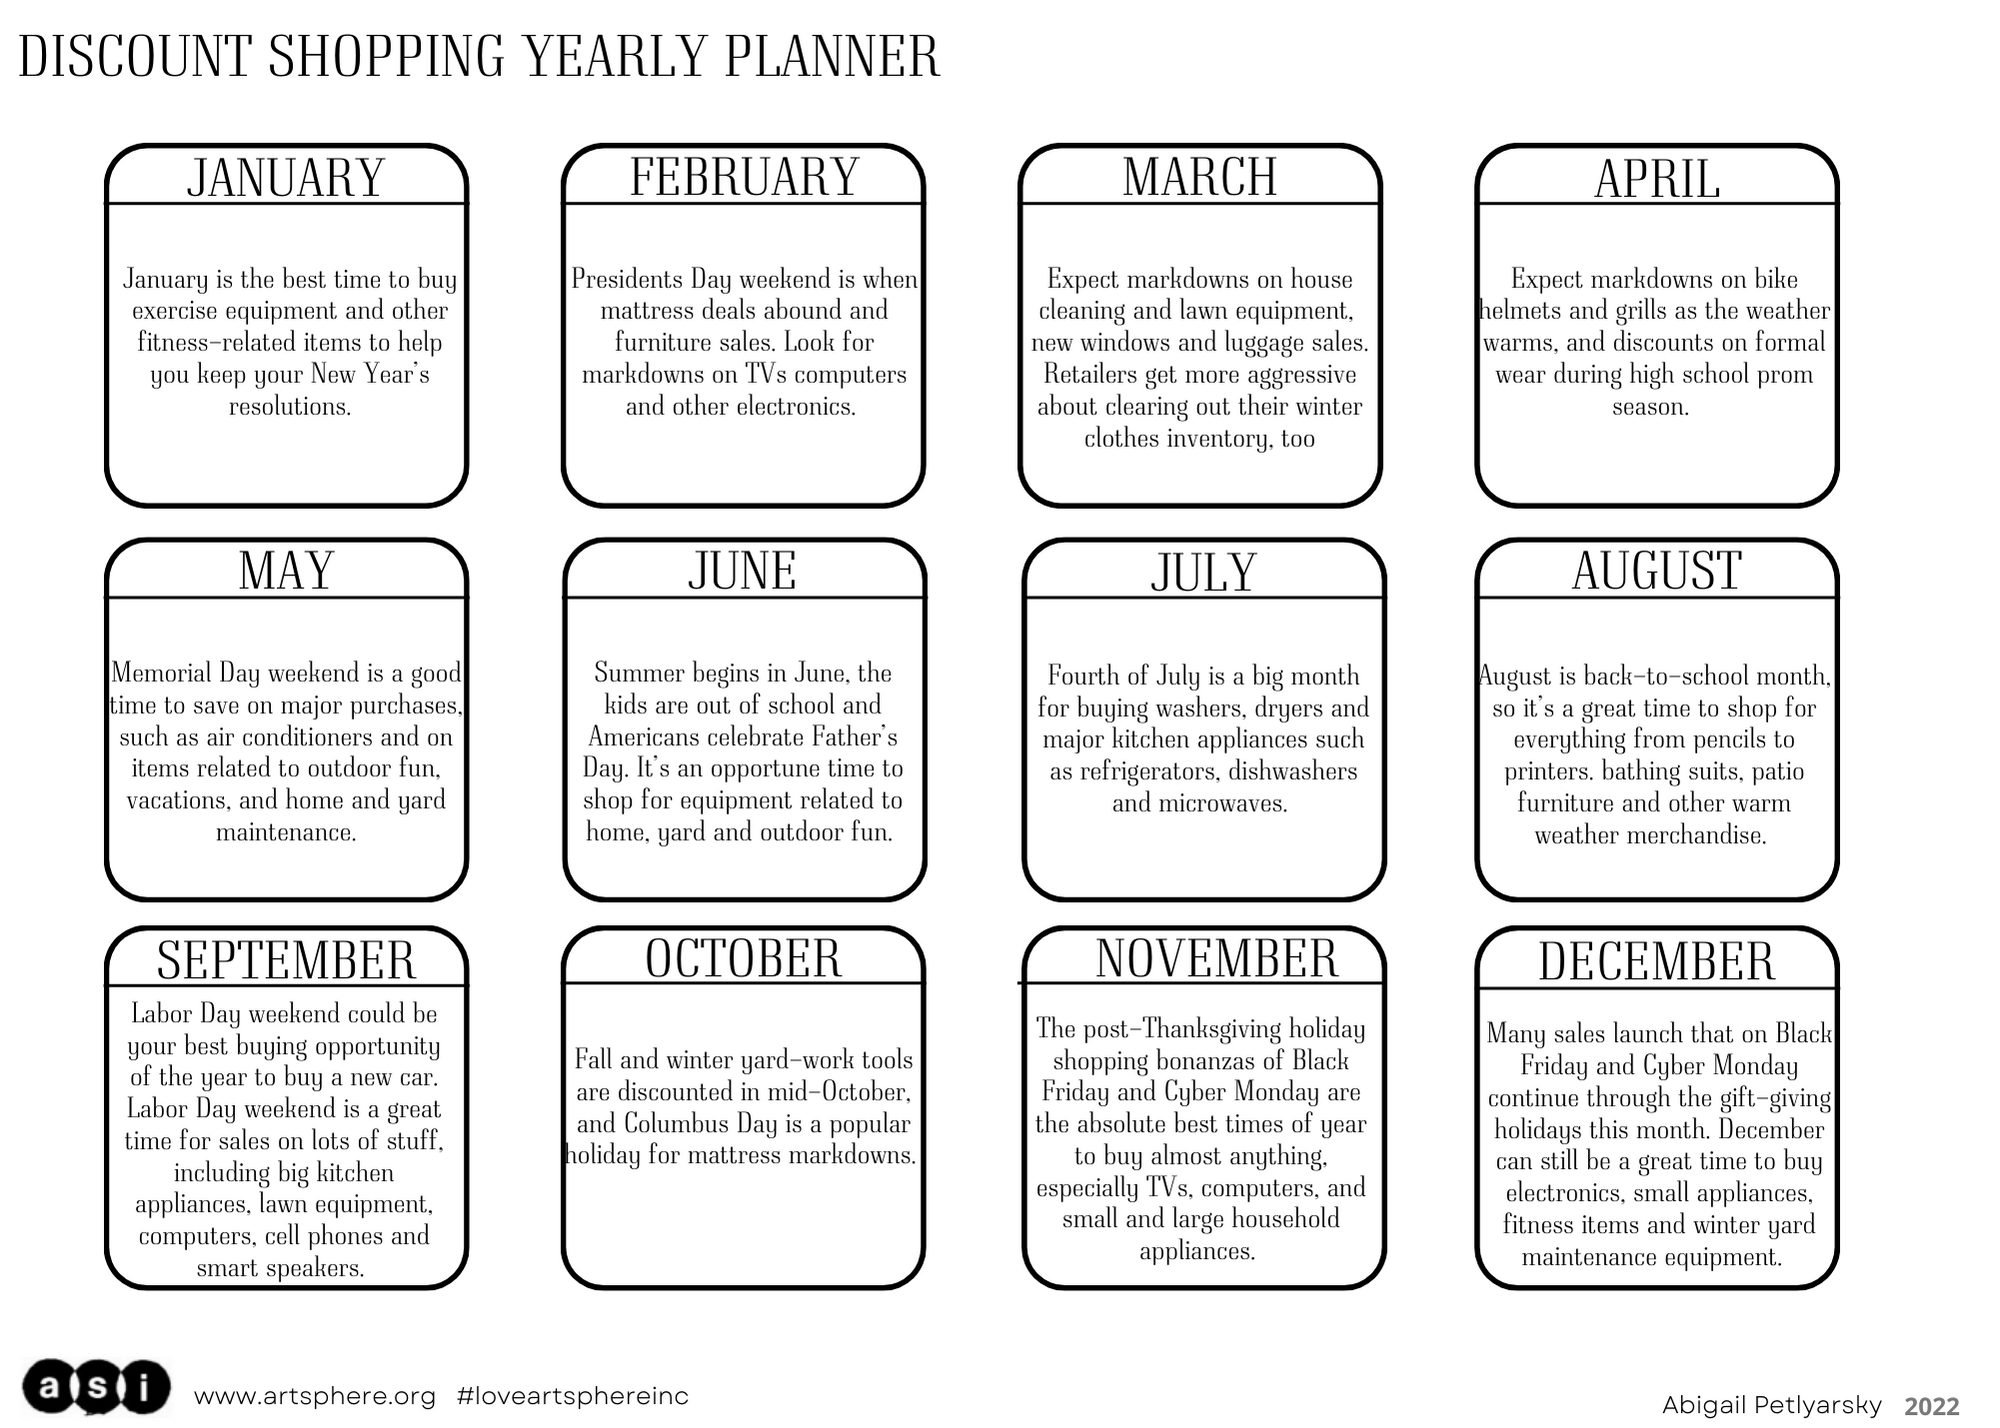 discount-shopping-yearly-planner-art-sphere-inc